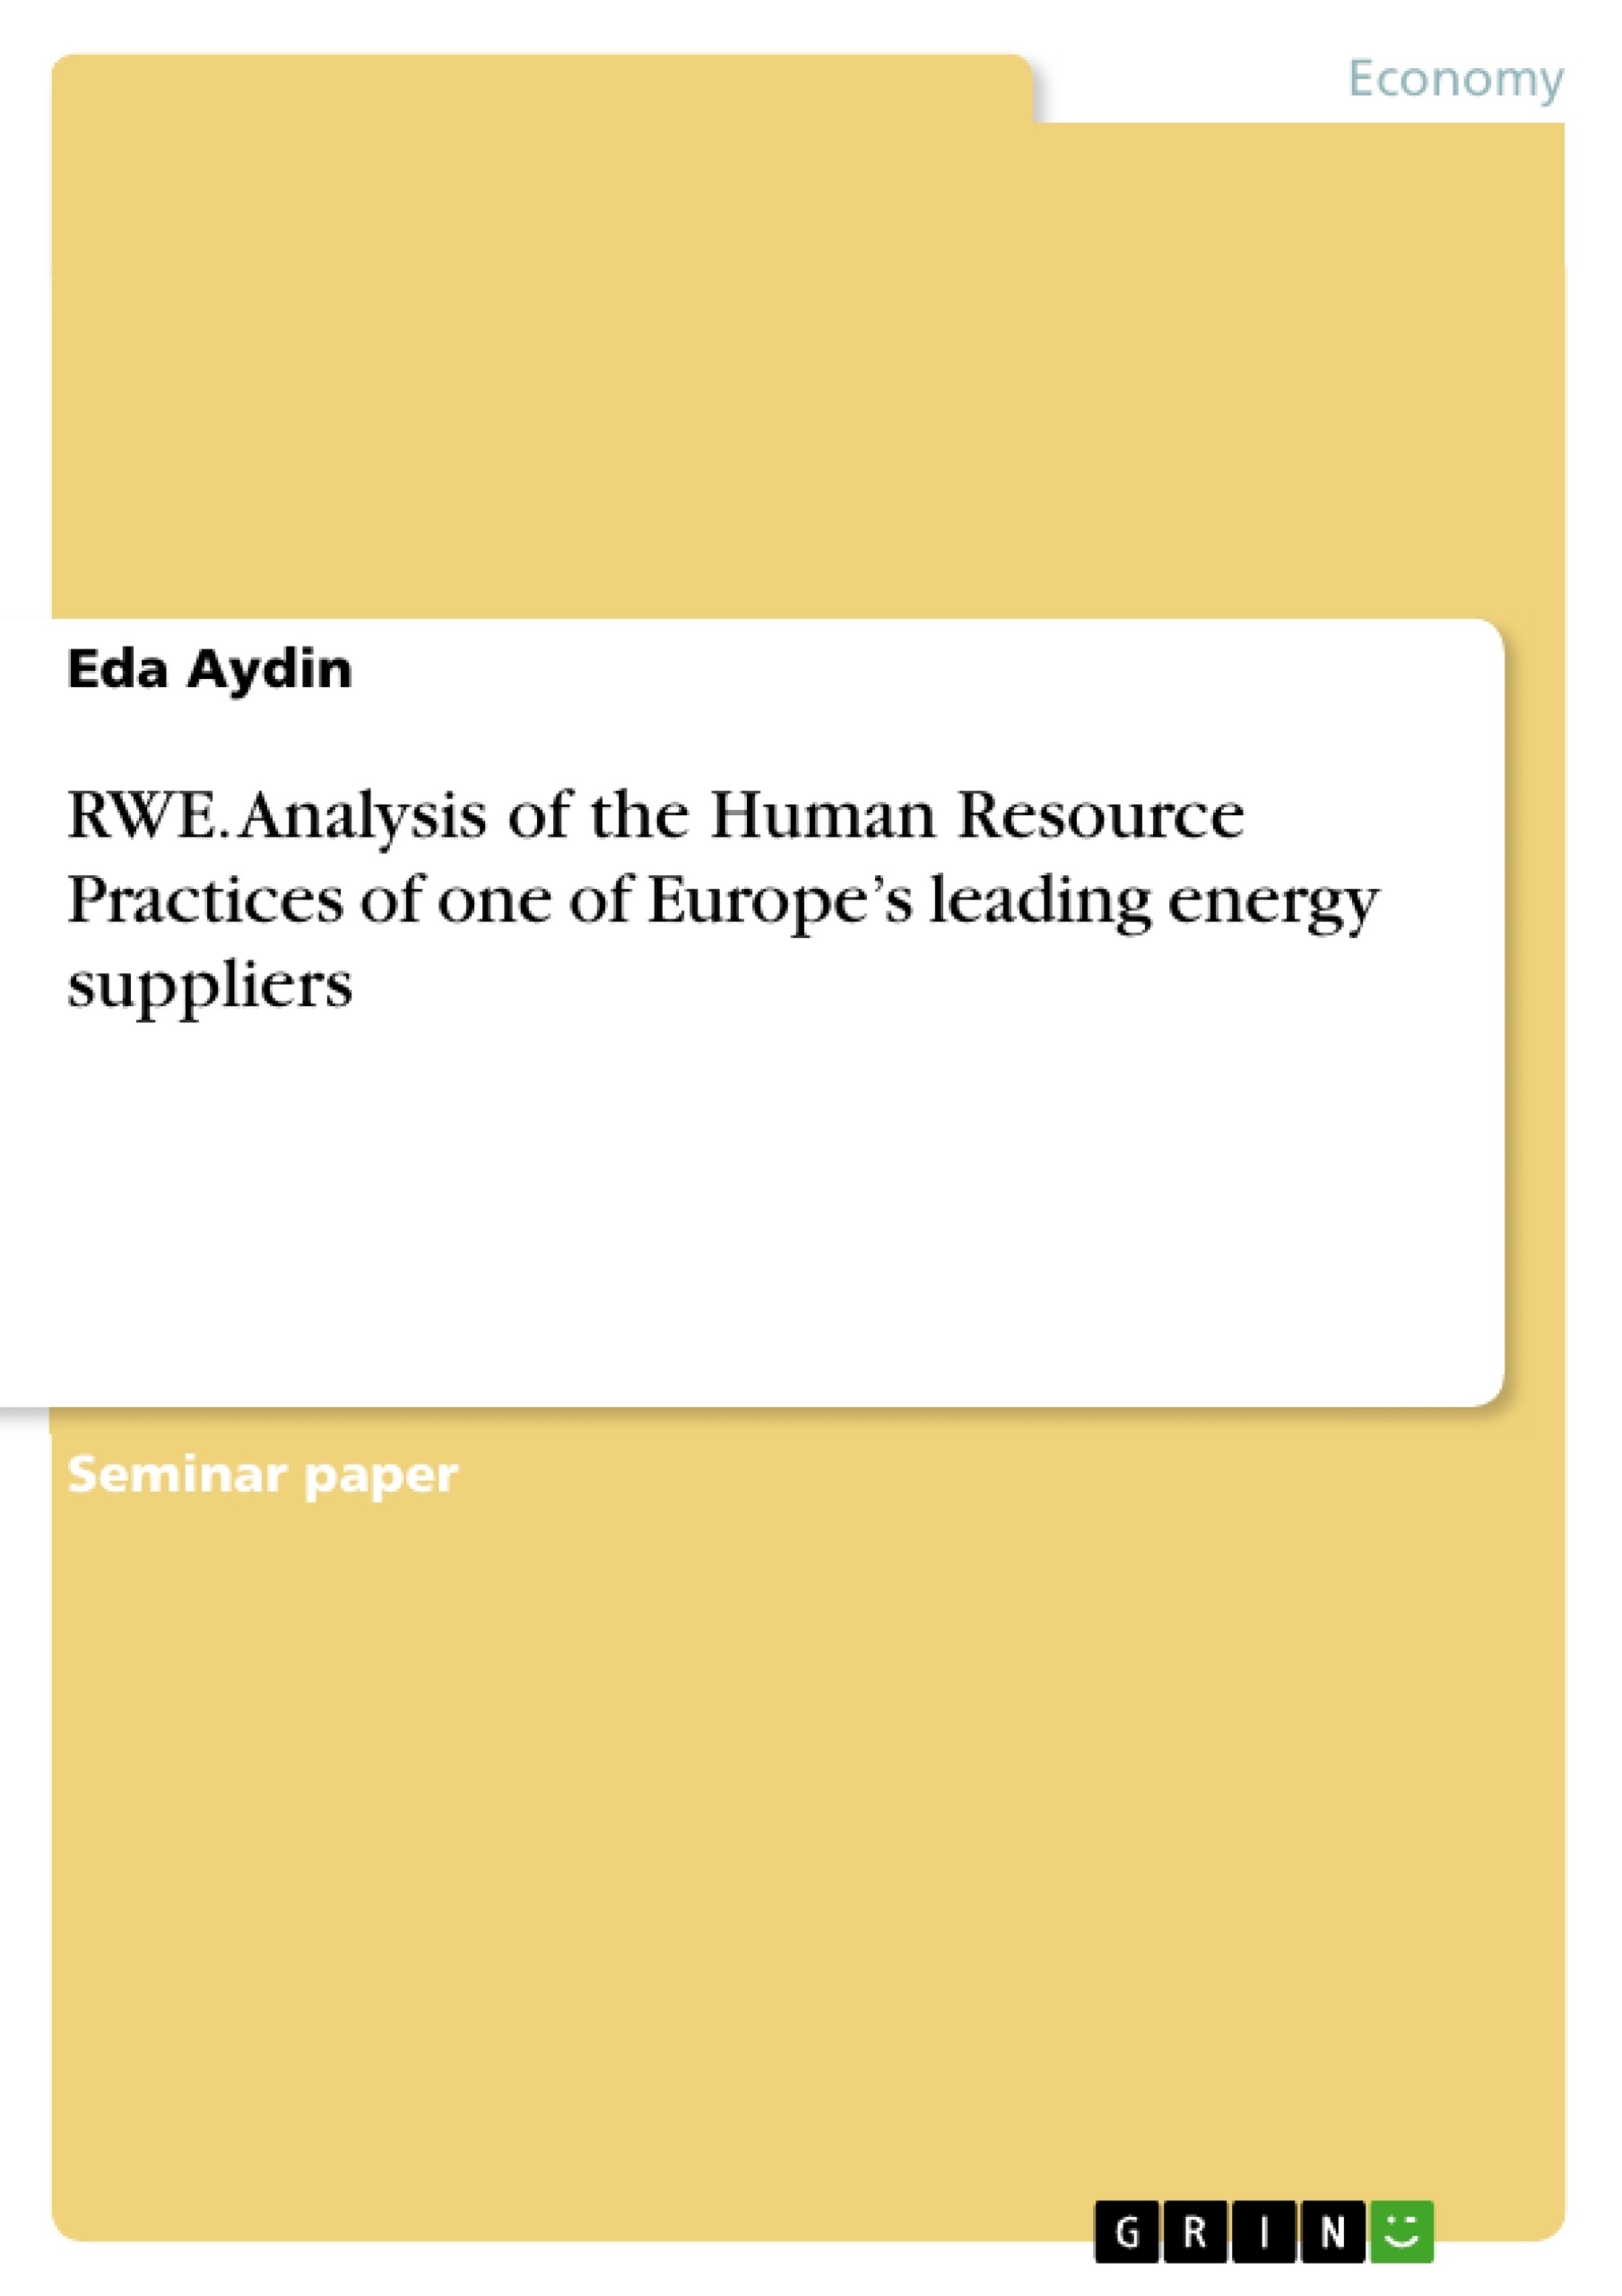 Titre: RWE. Analysis of the Human Resource Practices of one of Europe’s leading energy suppliers